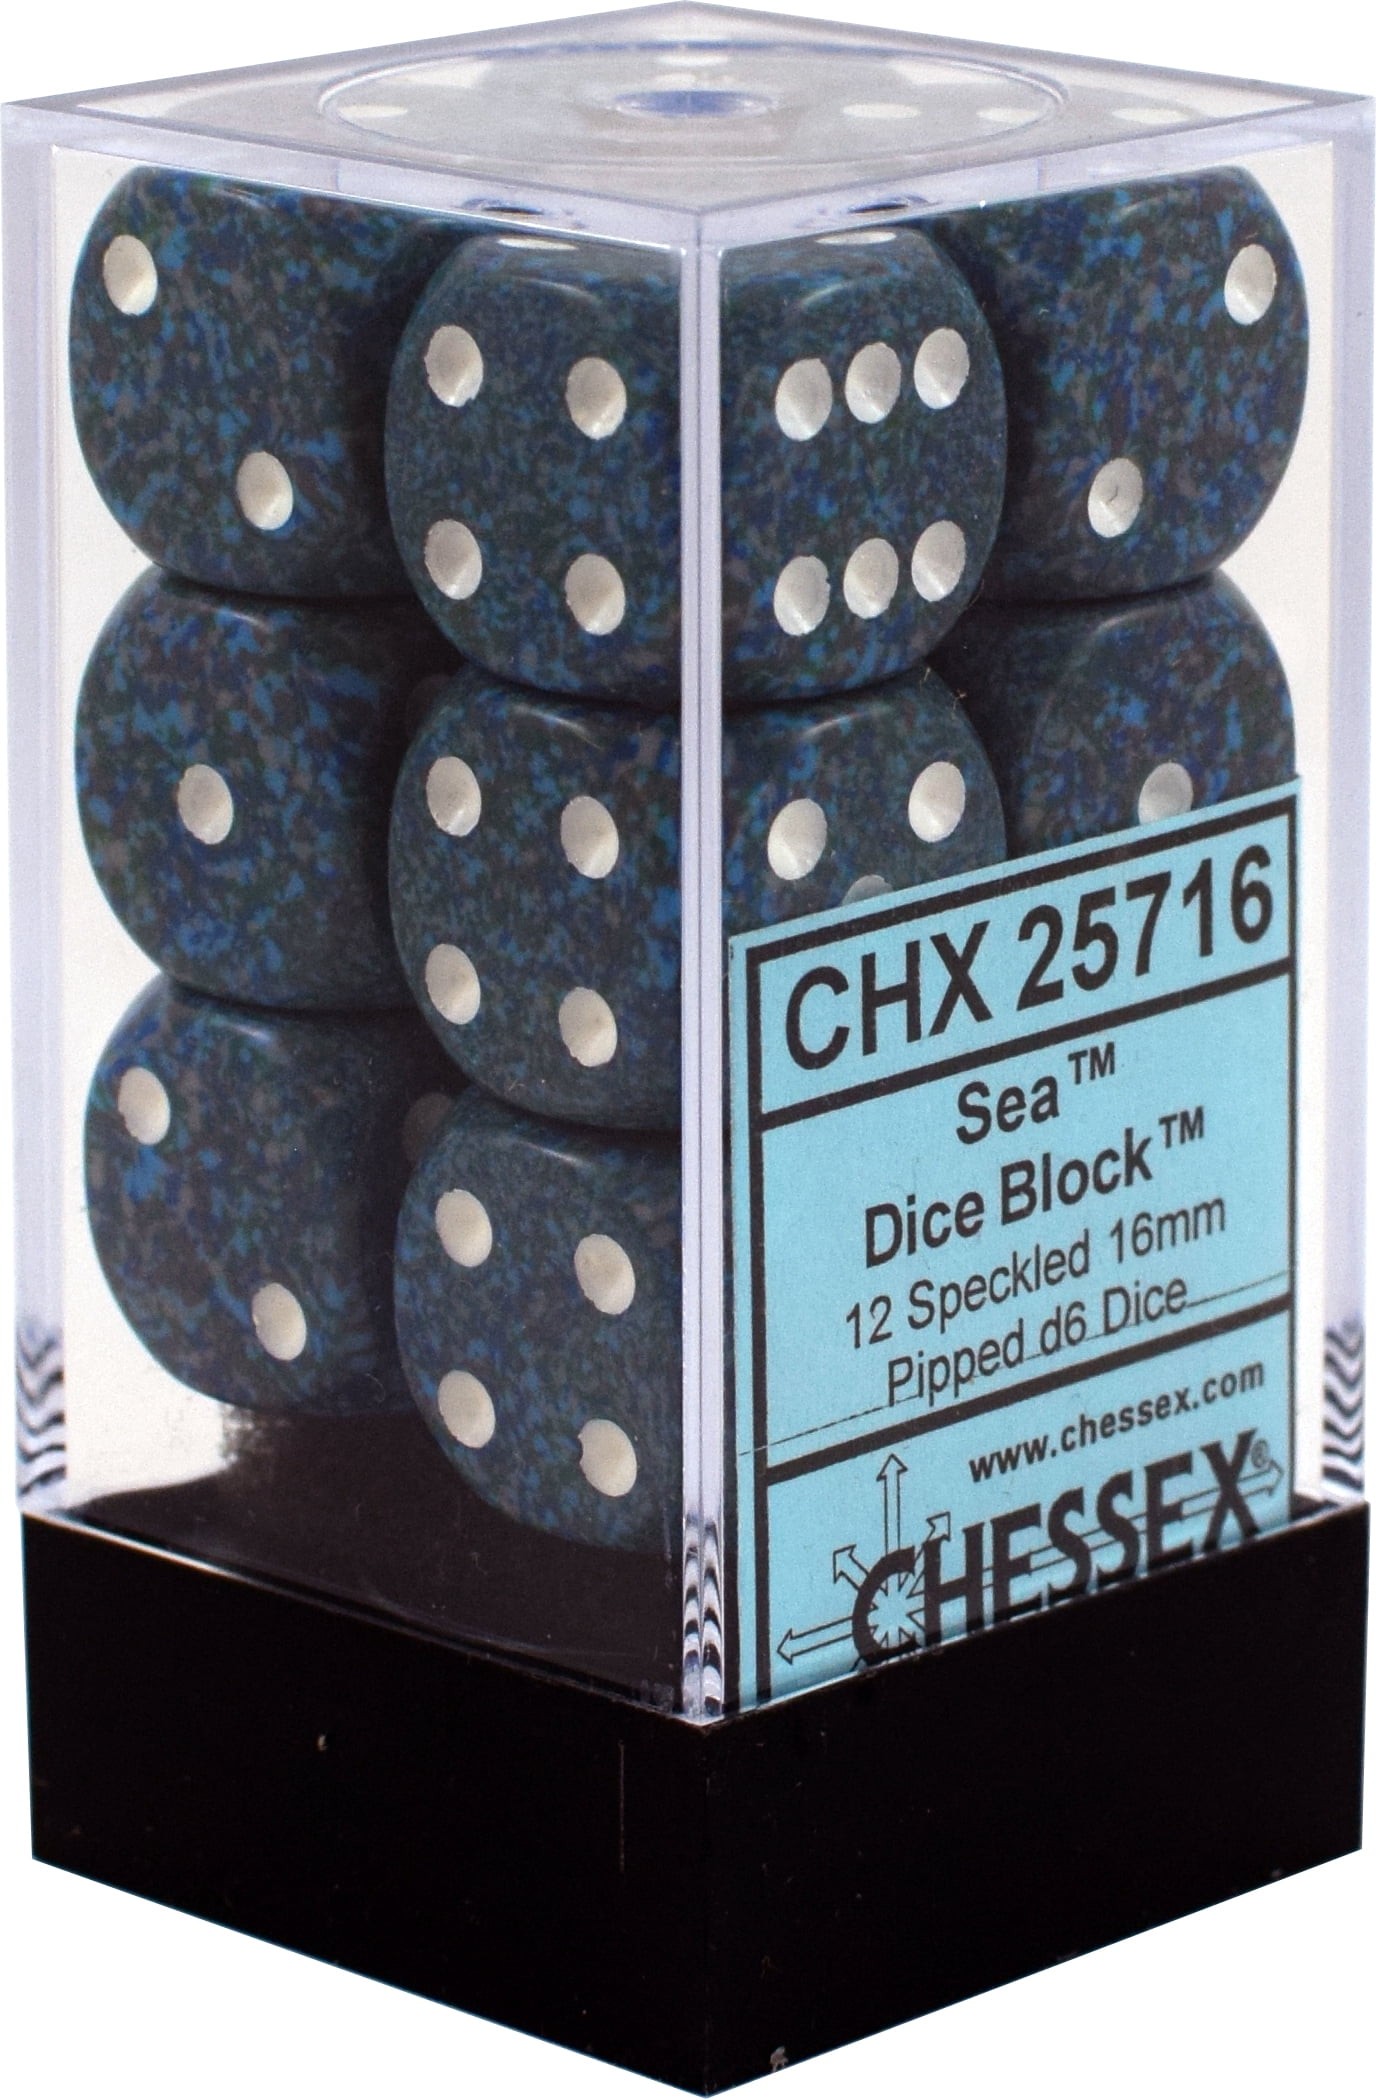 Chessex Dice Sea Speckled with White Pips 16mm D6 12 Die Set CHX 25716 